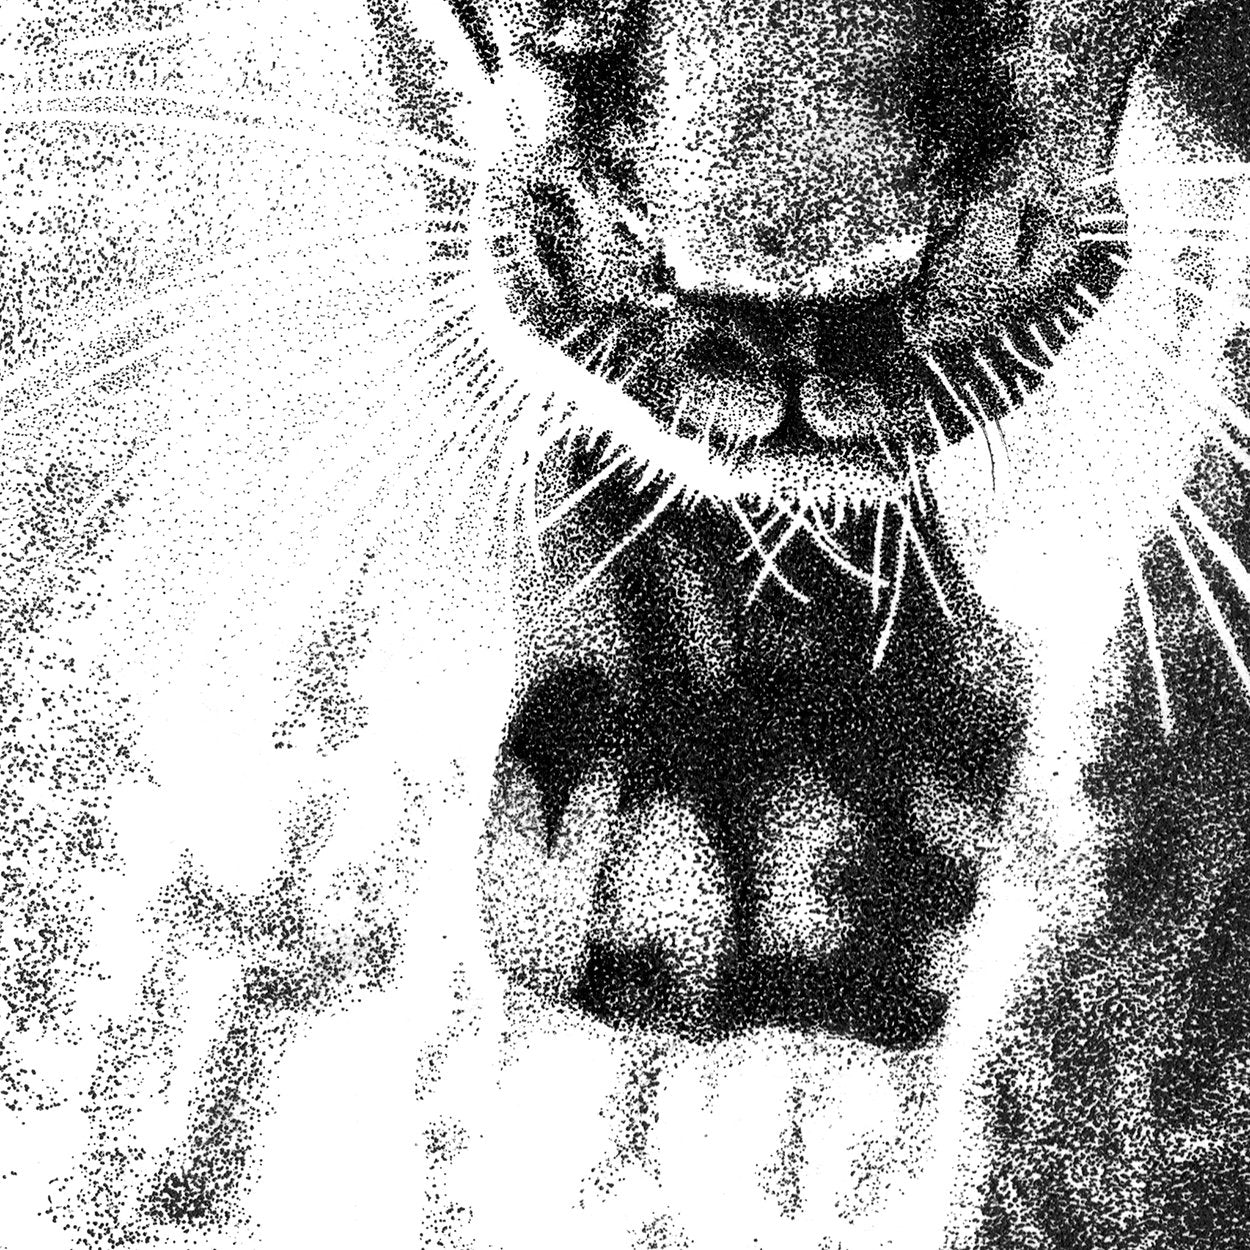 Black Leopard Pen Stippling Close-up - The Thriving Wild